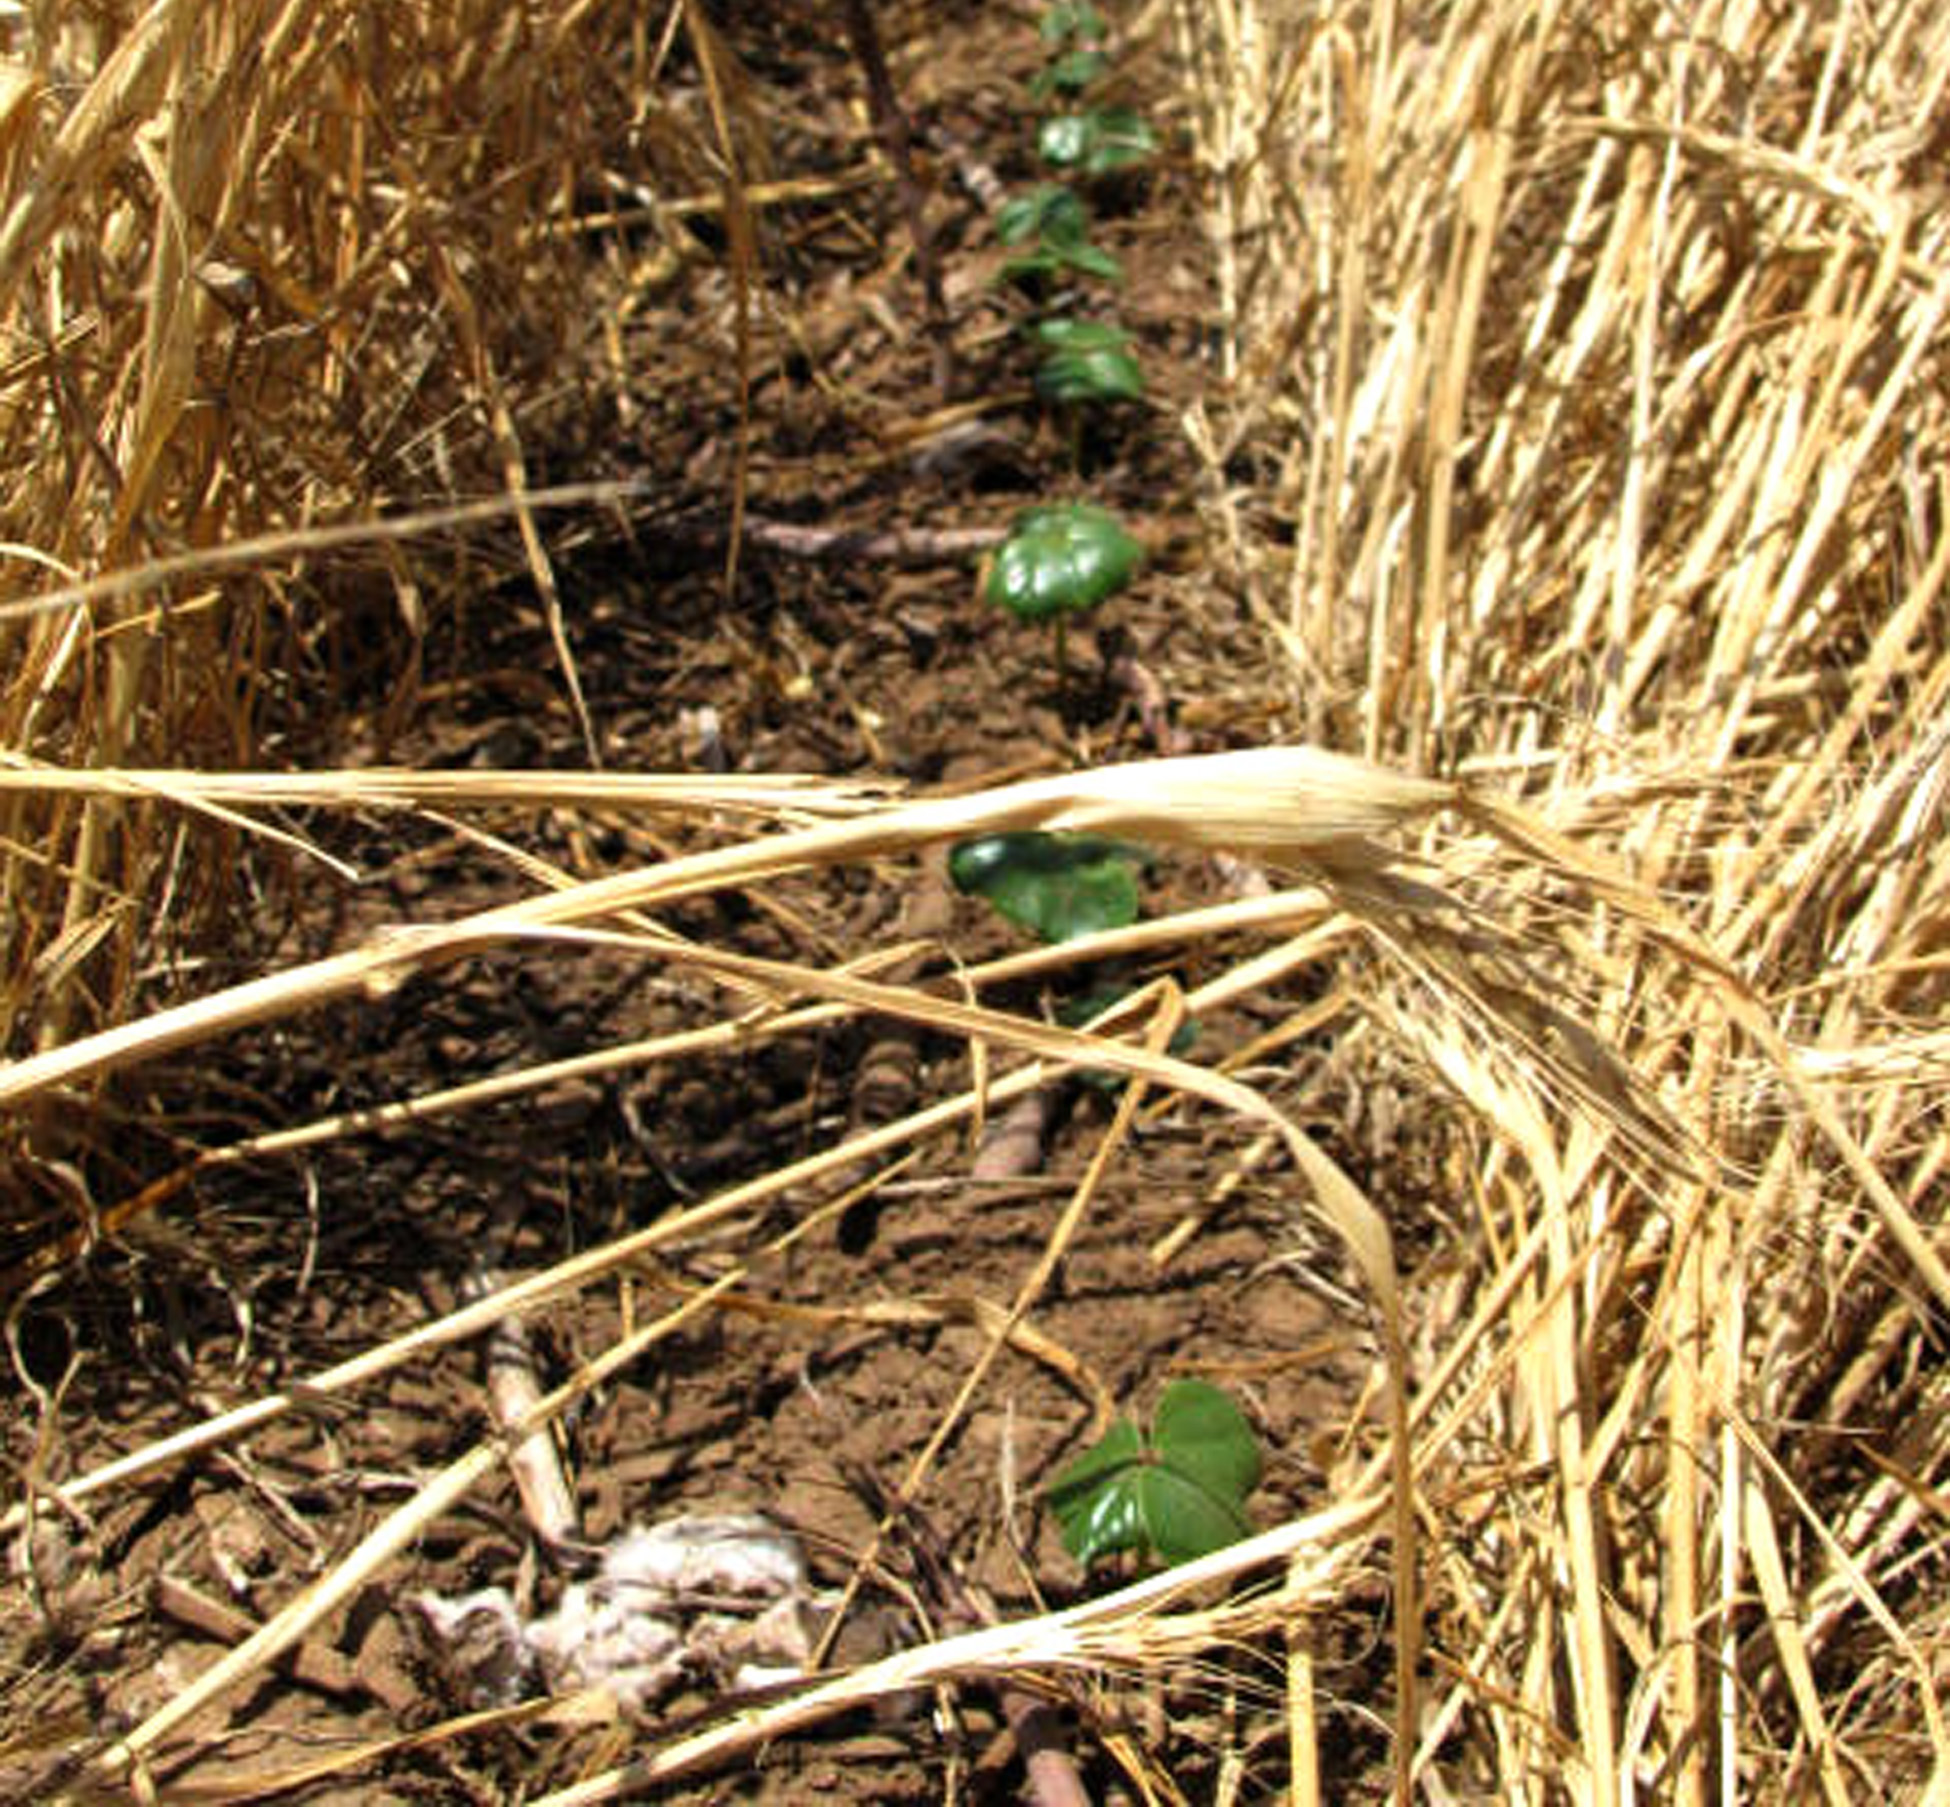 Winter wheat is feasible cover crop for Rolling Plains cotton. (Texas A&M AgriLife photo by Dr. Paul DeLaune)